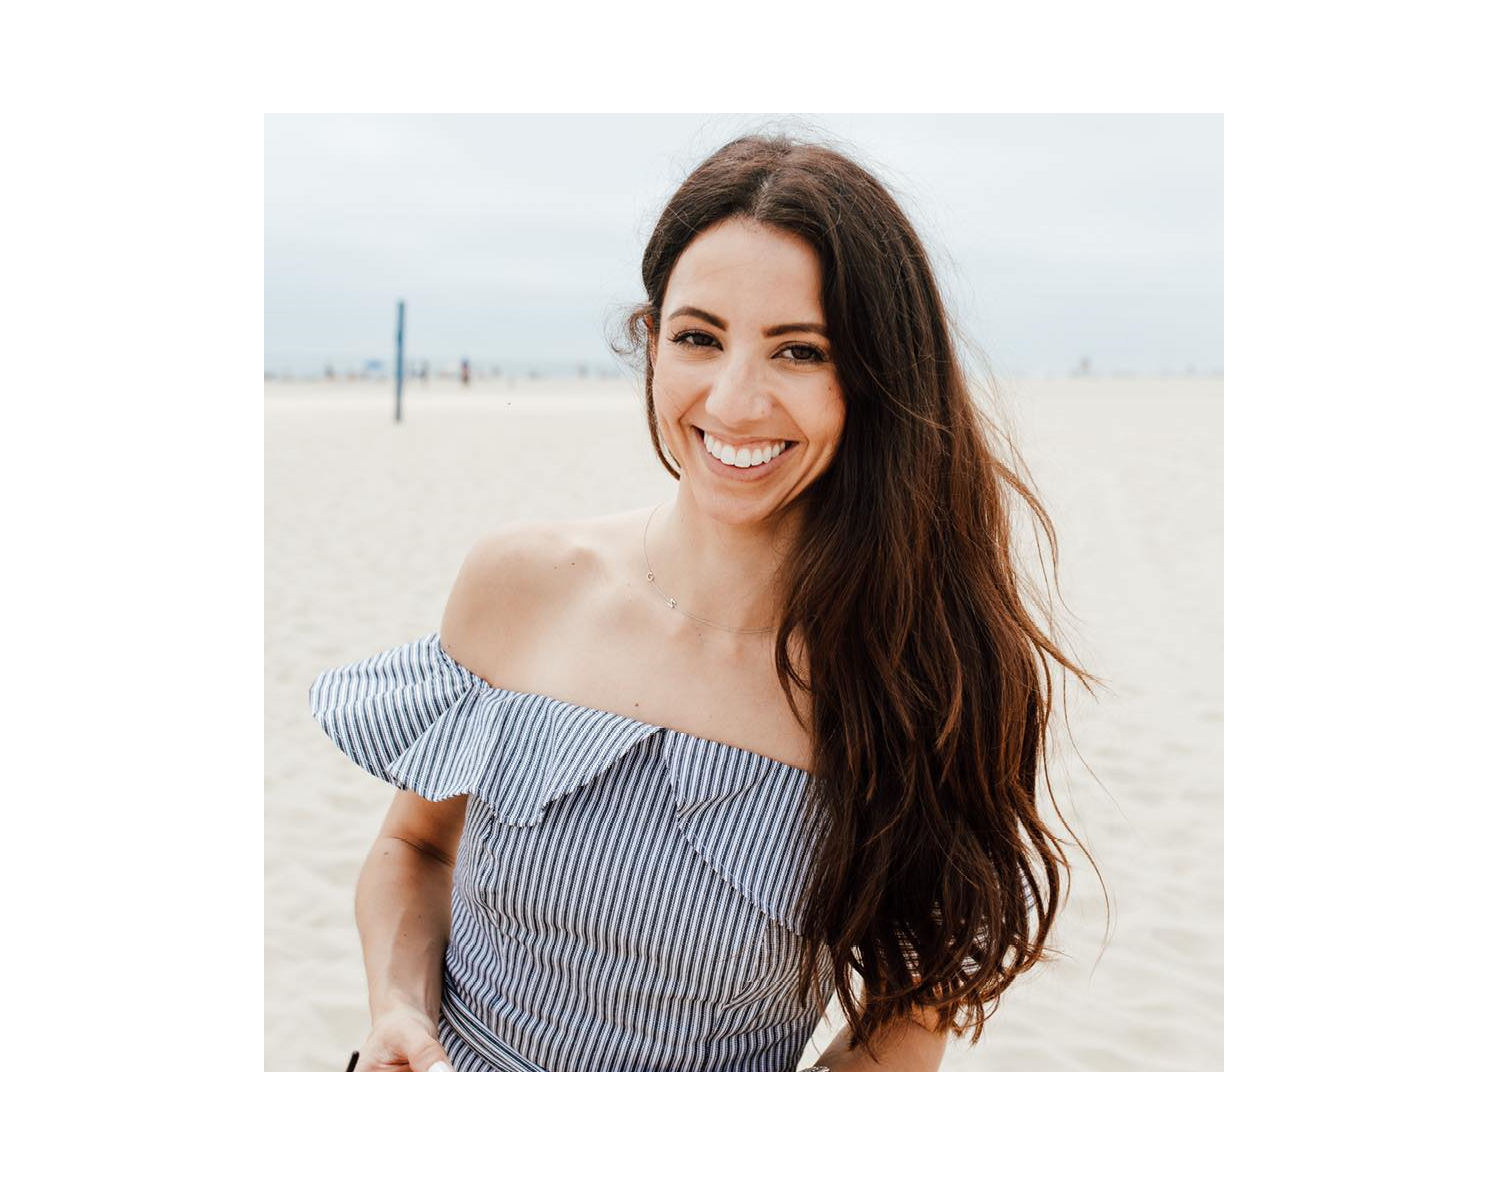 The Balanced Life of Dr. Cassie Majestic: Navigating Health, Wellness, and Emergency Medicine